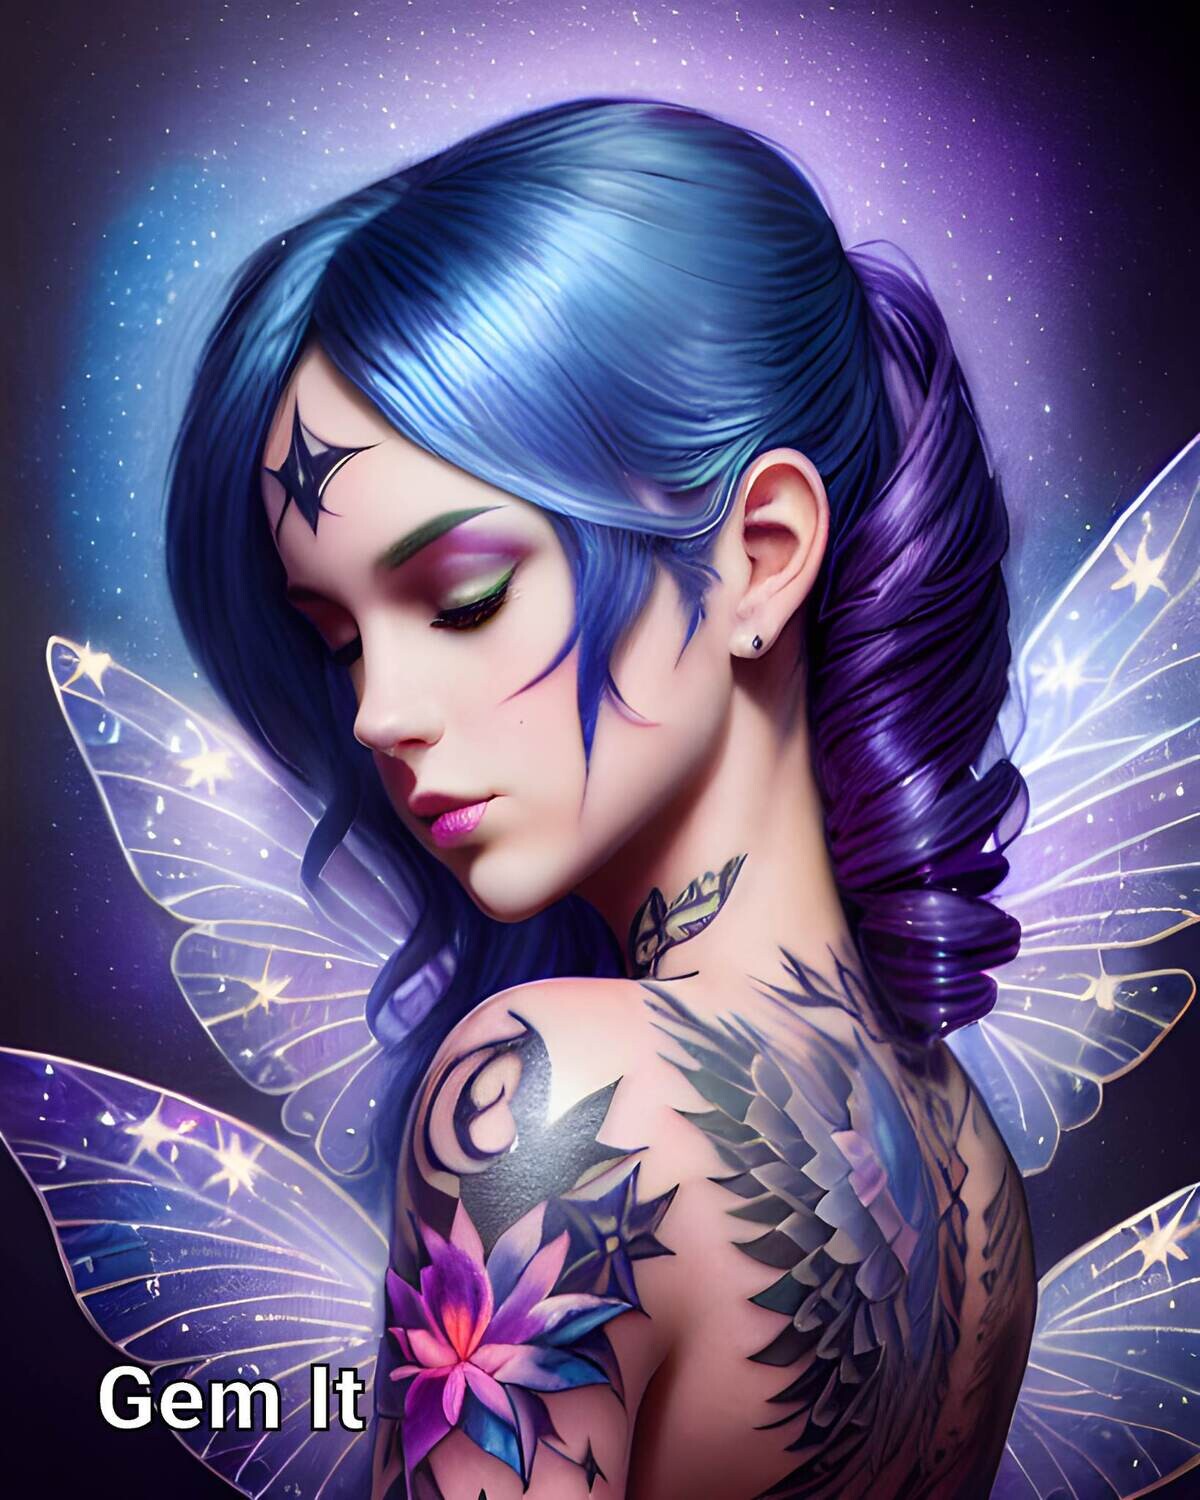 Fairy tattoo 444 - Specially ordered for you. Delivery is approximately 4 - 6 weeks.